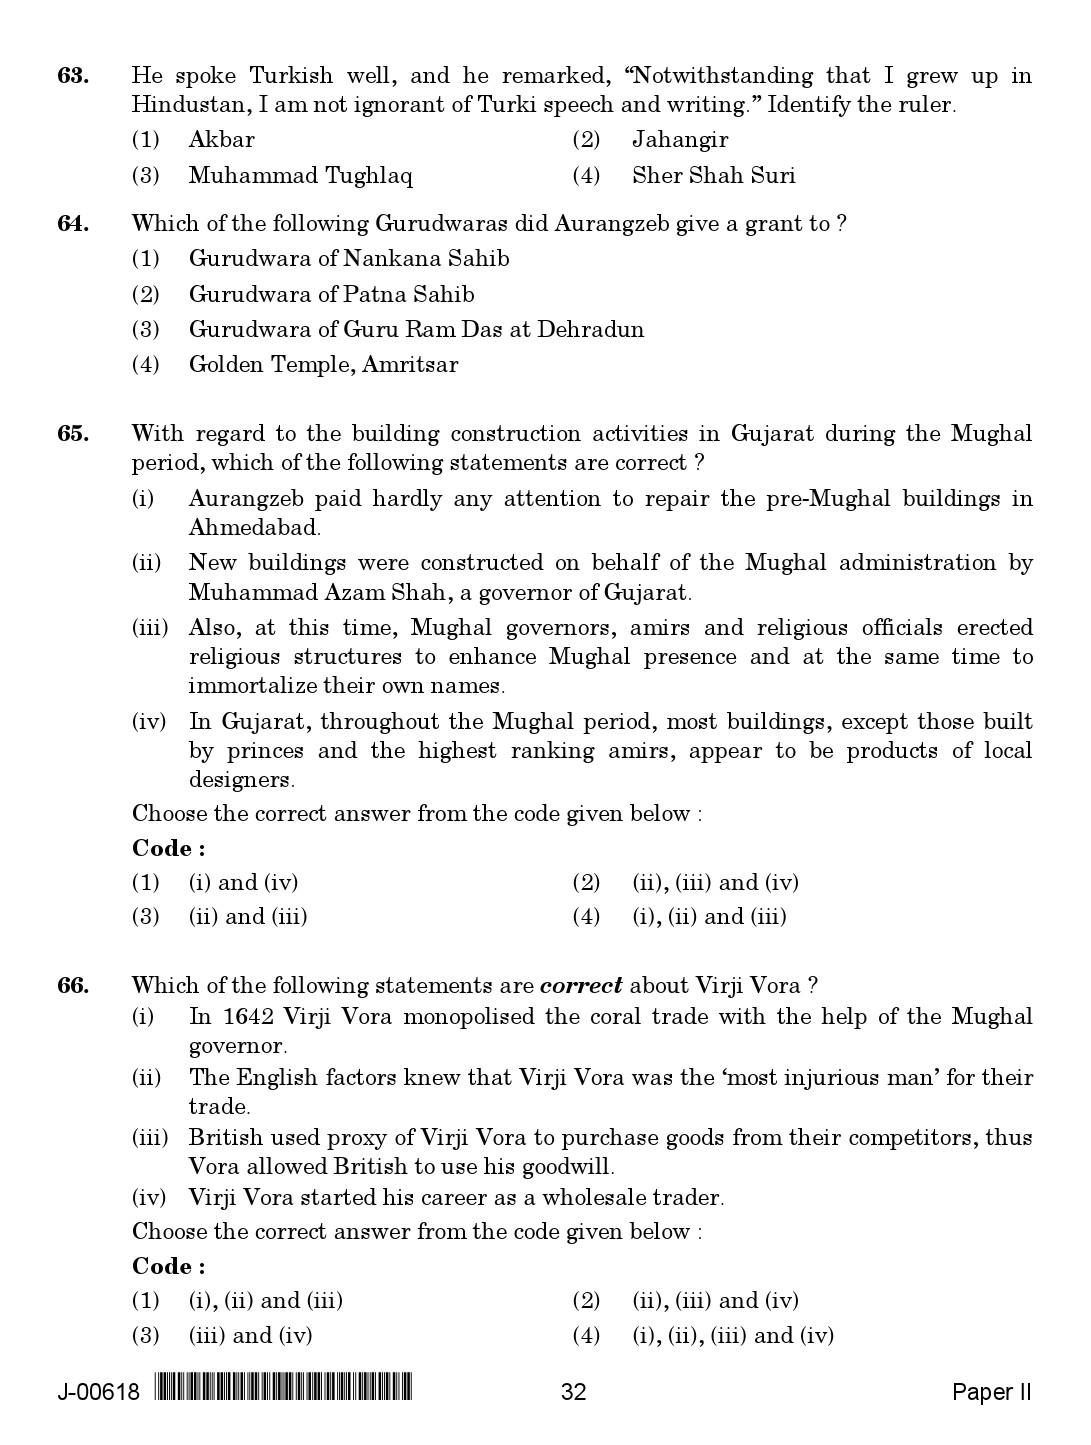 History Question Paper II July 2018 in English 2nd Exam 17